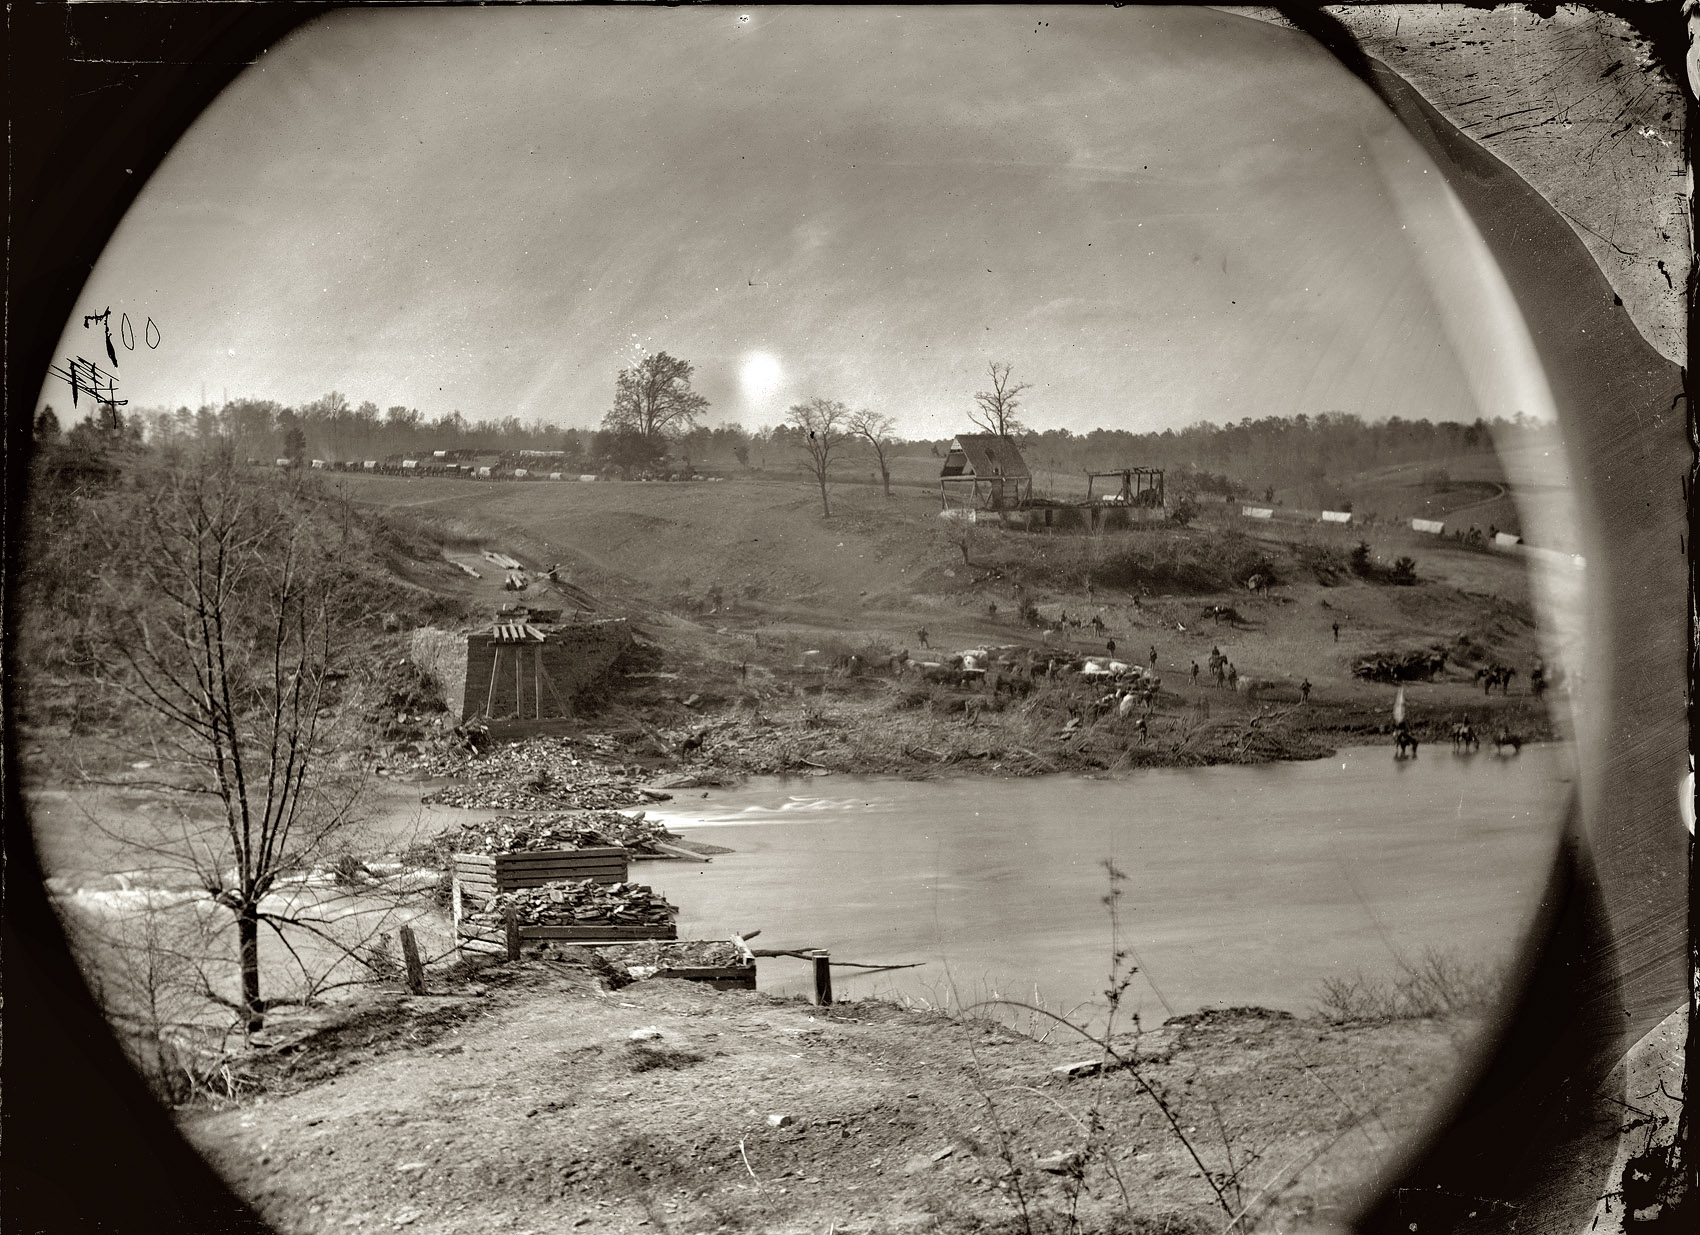 May 1864. "Rappahannock River, Virginia. Ruins of bridge at Germanna Ford, where the troops under General Grant crossed May 4." Wet plate glass negative by Timothy O'Sullivan. View full size. (Though the caption on the negative sleeve says Rappahannock, Germanna Ford seems to have been on the Rapidan River.)